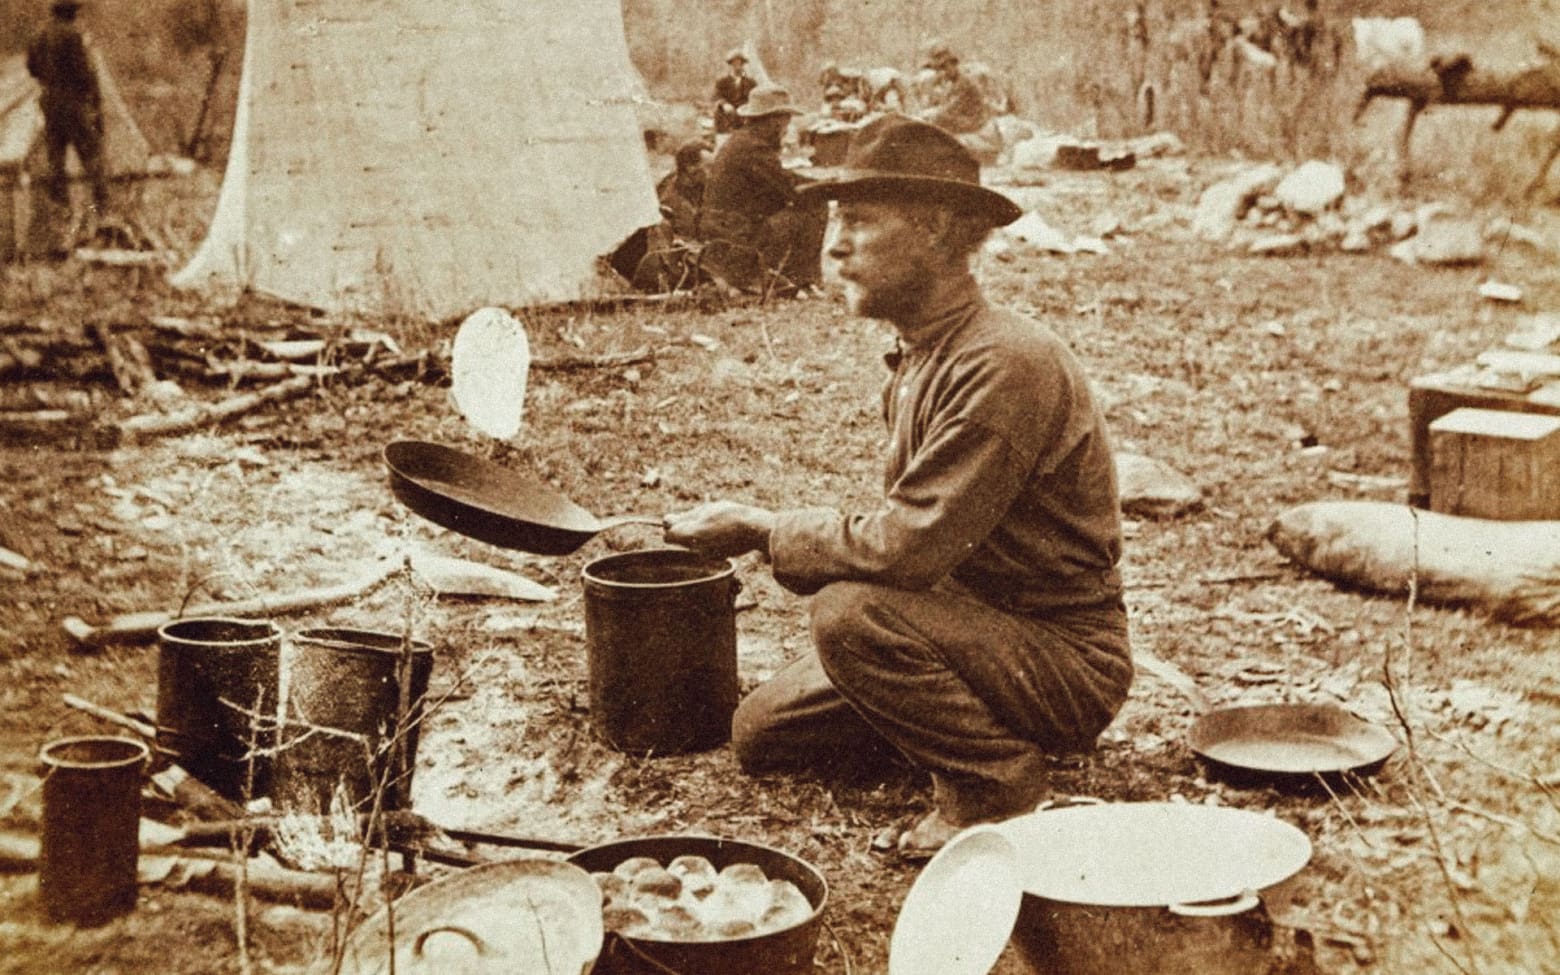 Could You Survive the 1800s? Take This Quiz to Find Out food & water provisions 1800s